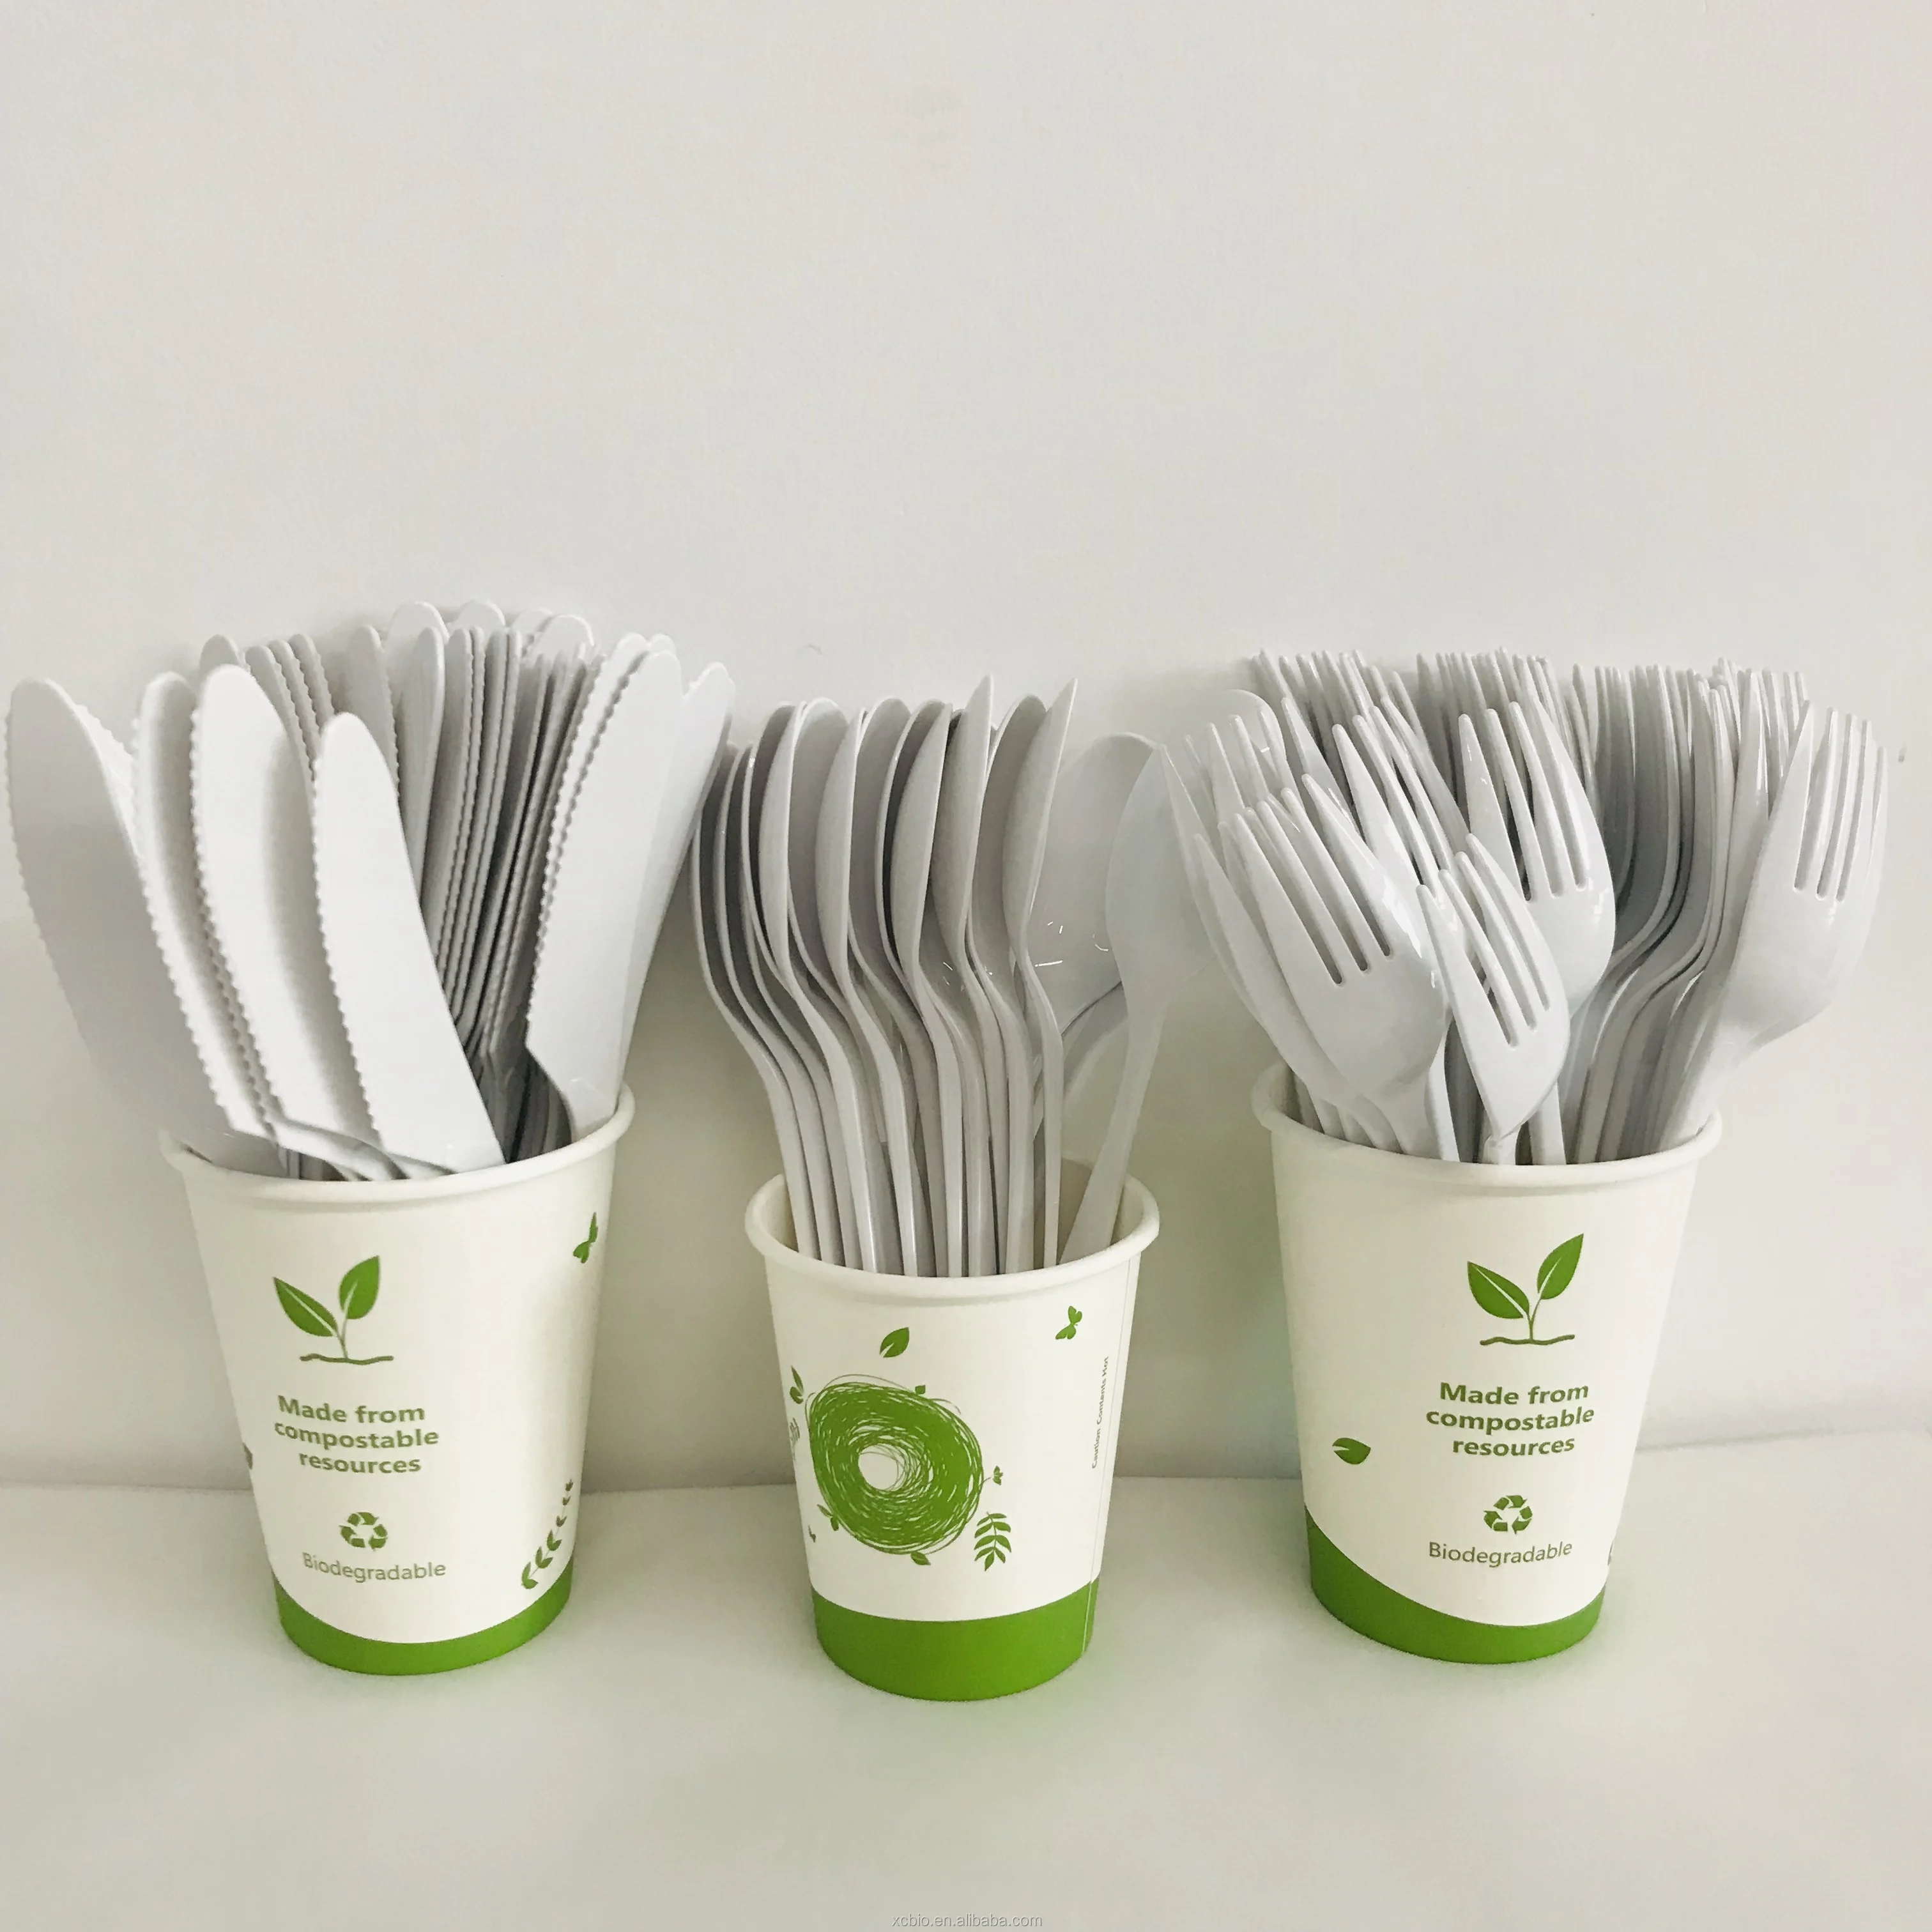 100% PLA biodegradable and compostable tableware,knives,spoons and forks